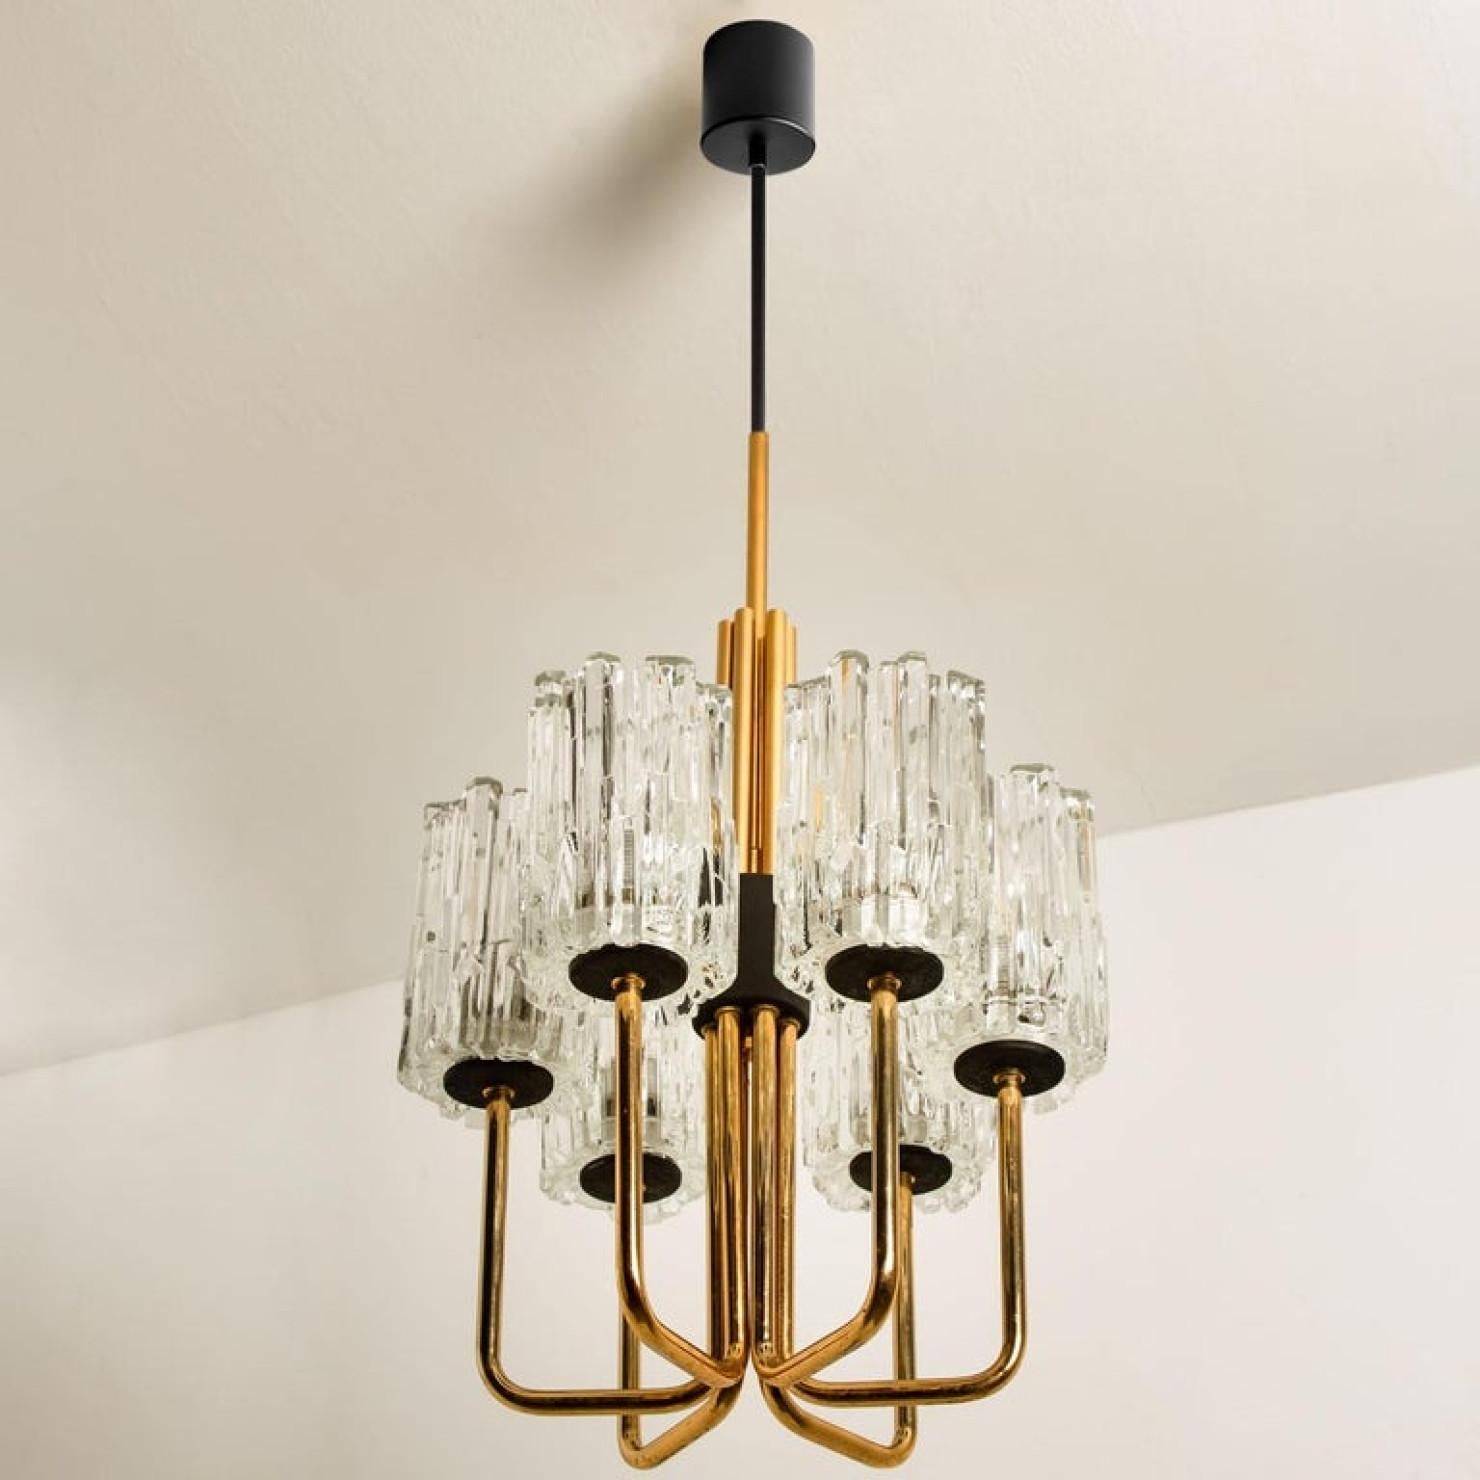 Midcentury Brass and Blown Glass Chandelier by Hillebrand, 1960s For Sale 10